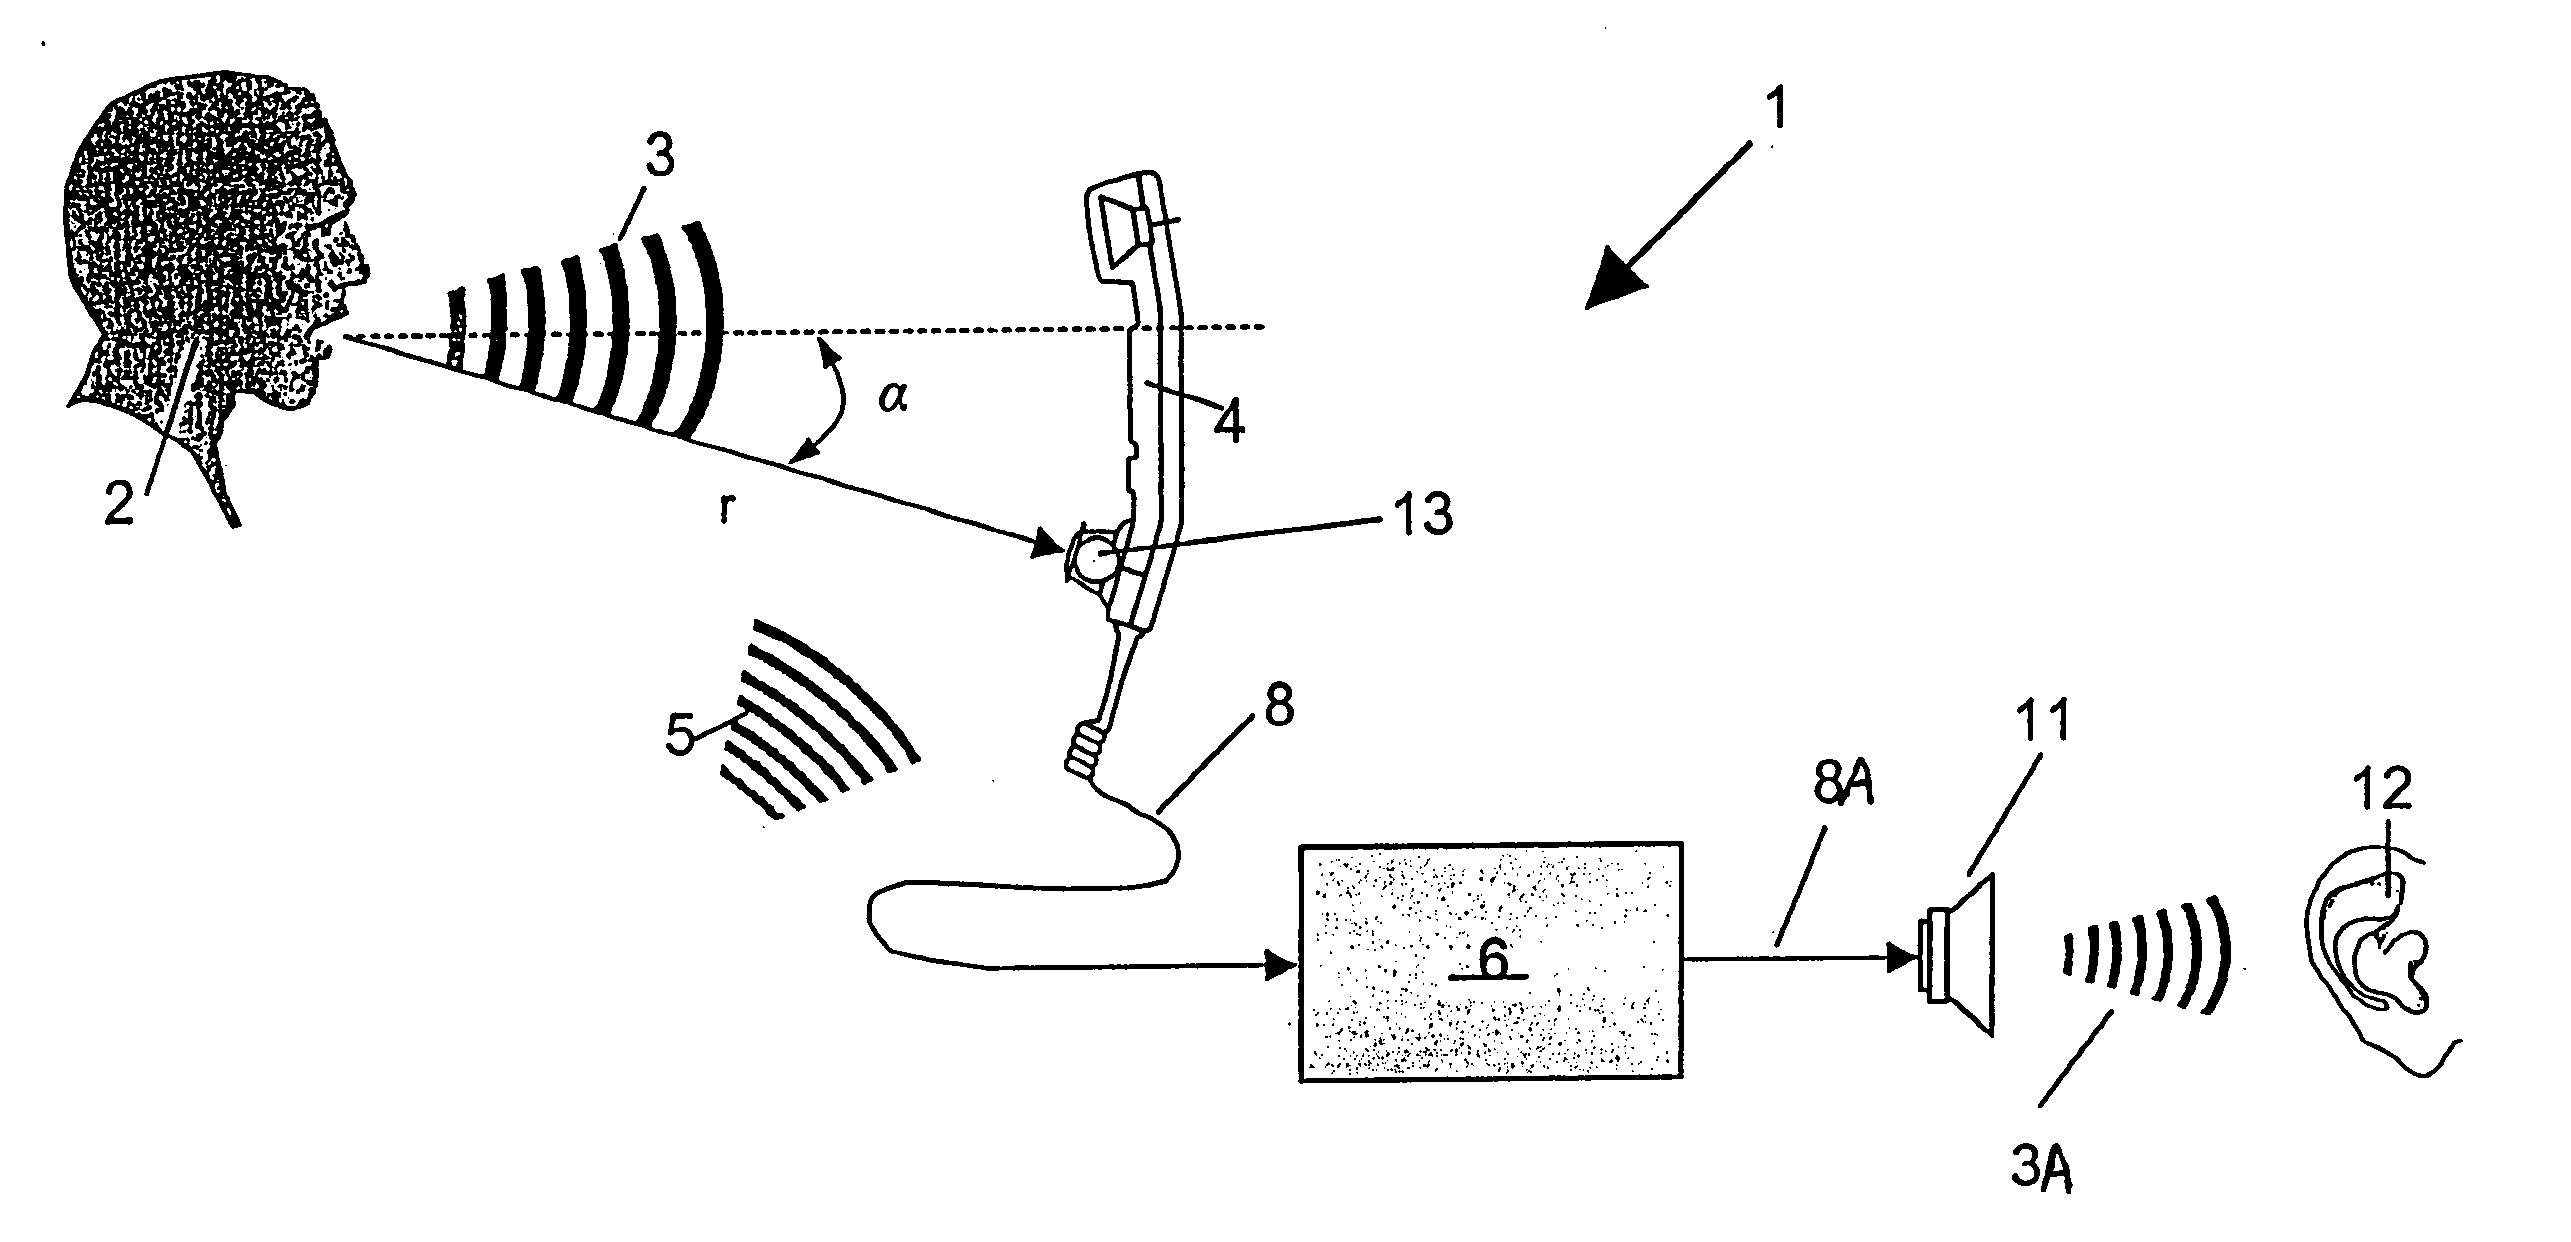 Method and apparatus for improving the quality of speech signals transmitted in an aircraft communication system